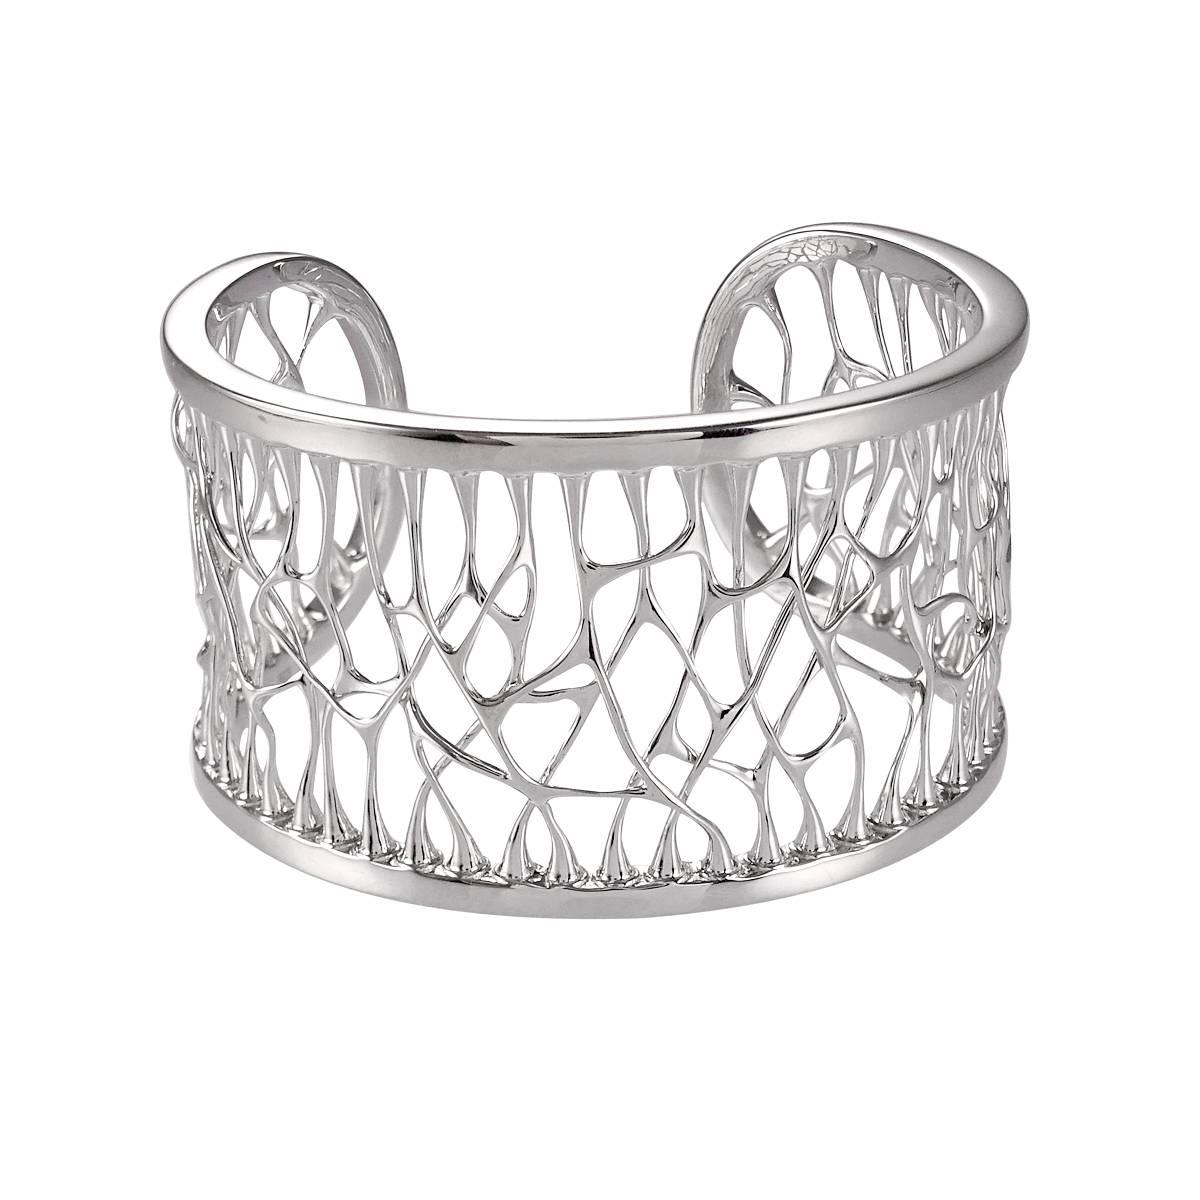 This is a Morphogen collection cuff in sterling silver.

The Morphogen Collection is Composed organic shapes that are morphogenic in nature, abstract, pulled, and stretched into a fluid form.

This piece represents our fluidity.

This piece